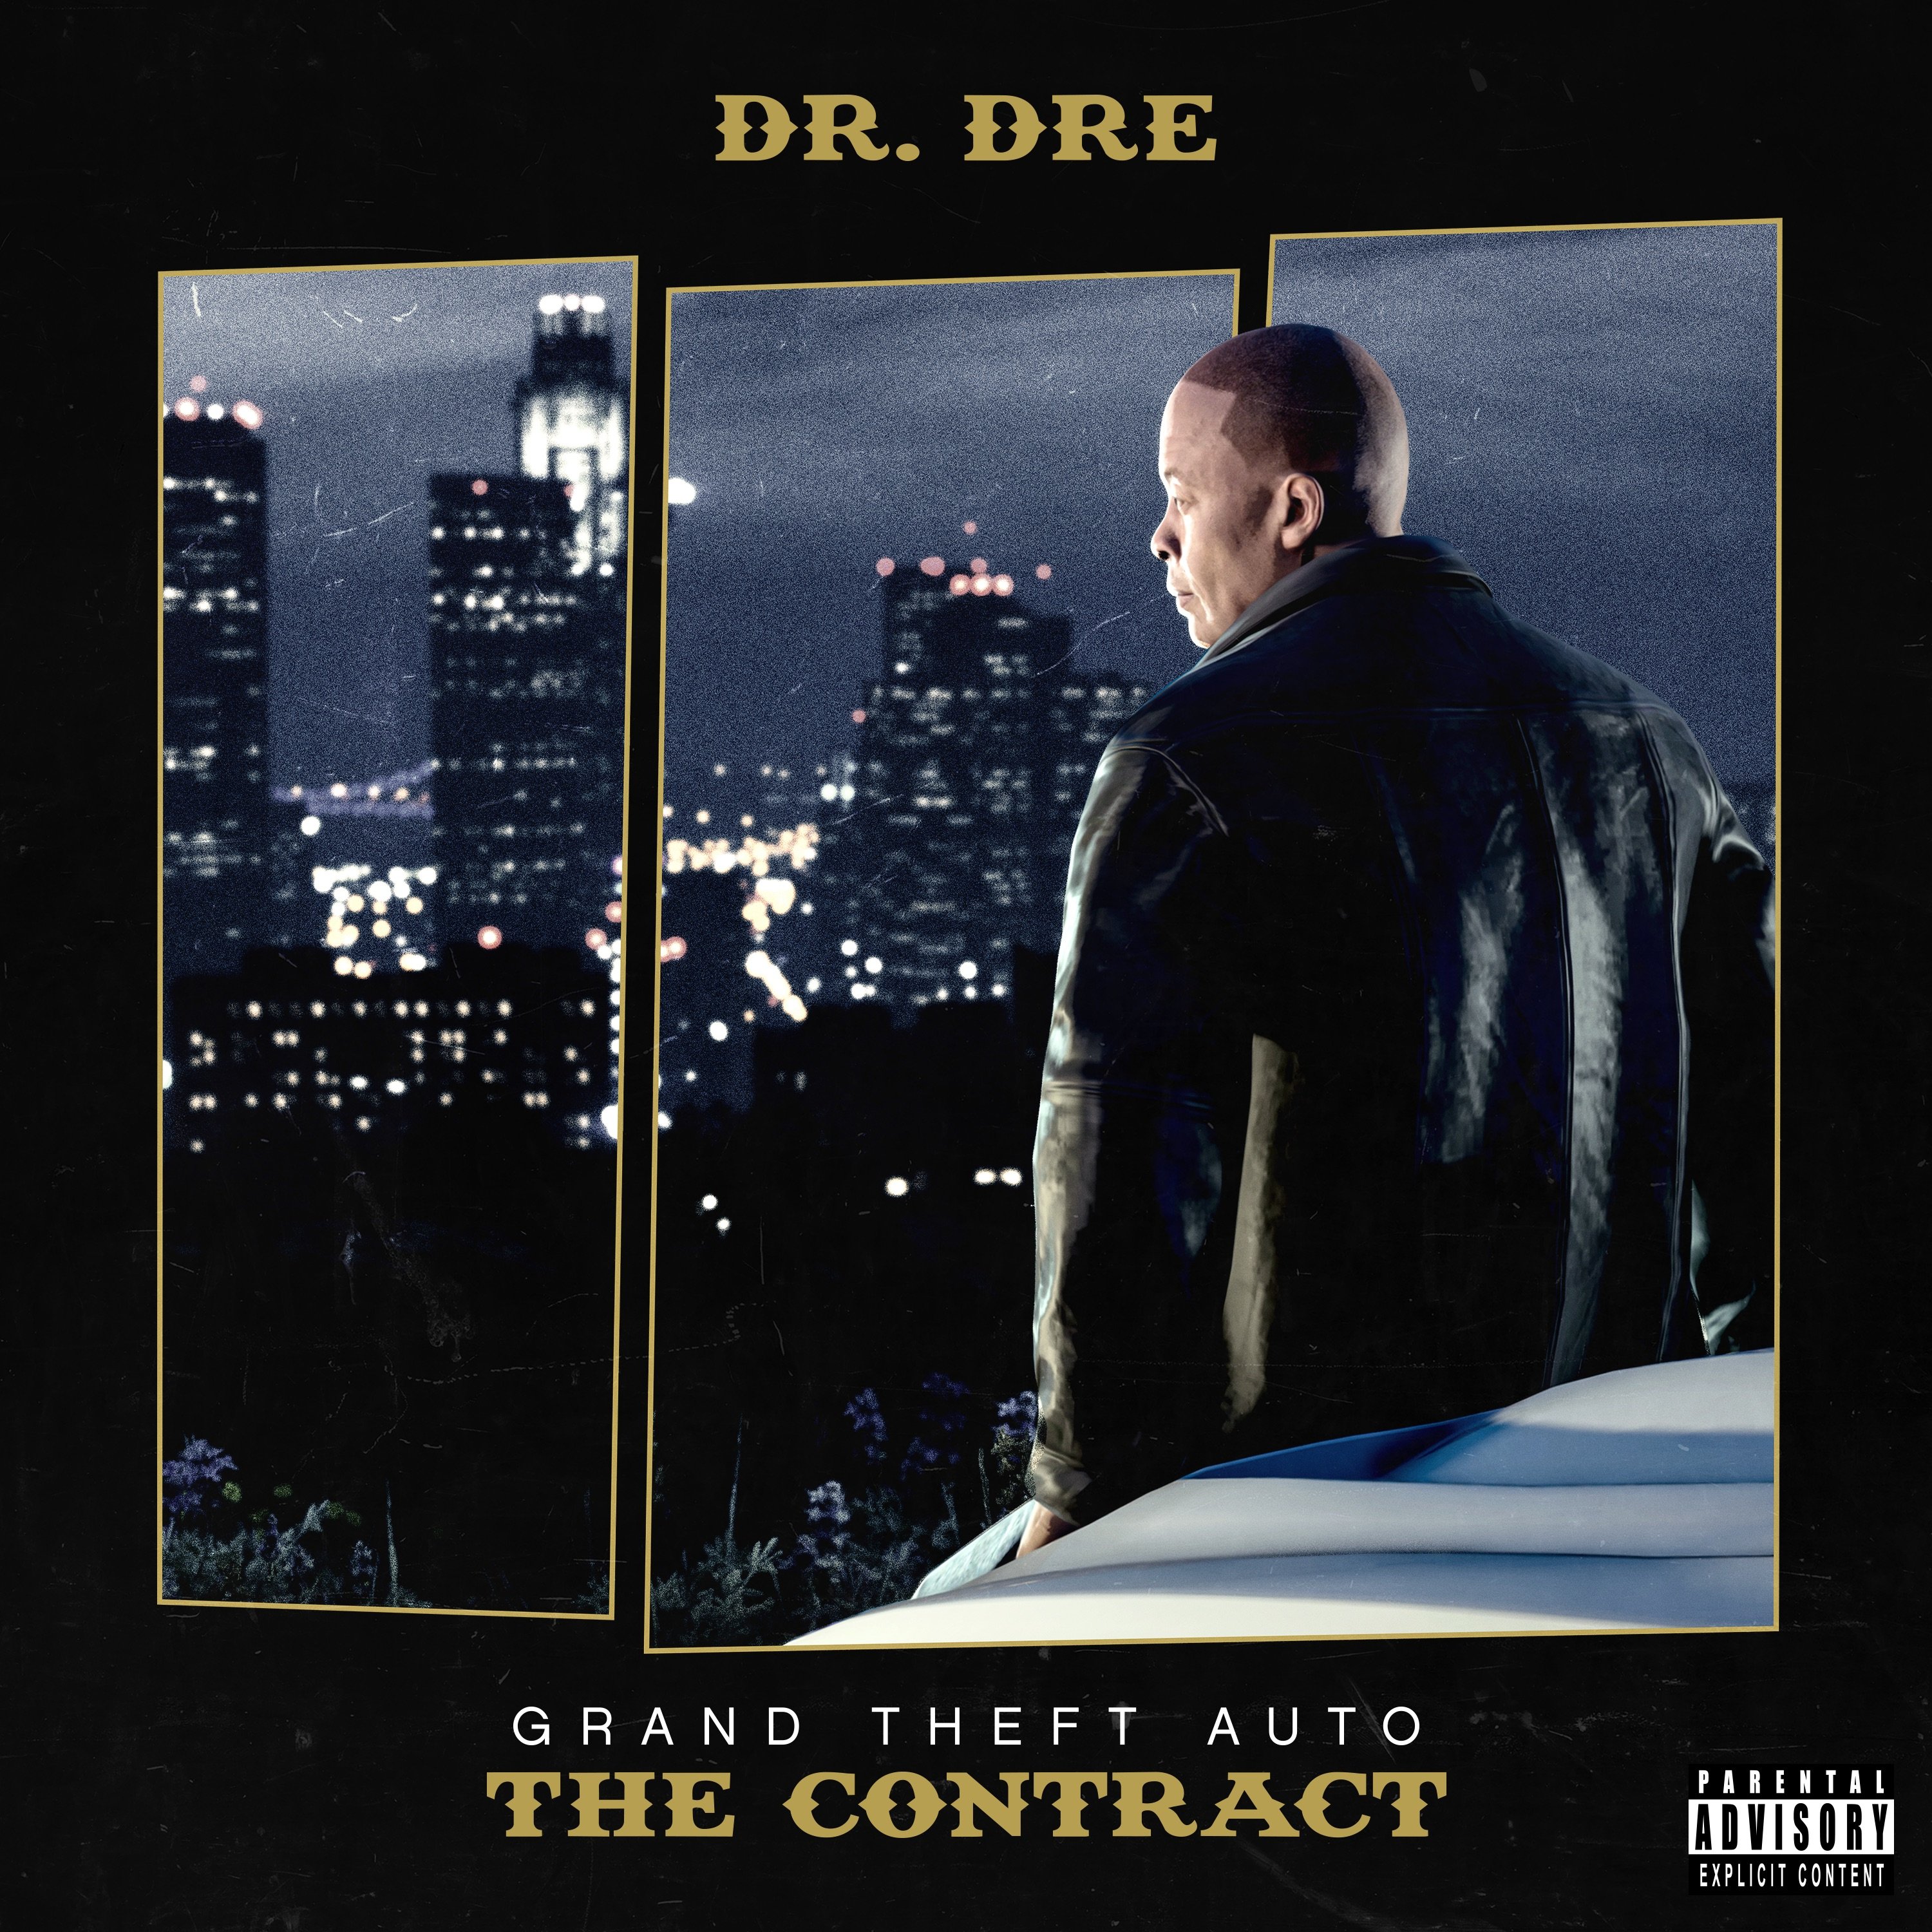 Dr. Dre Enlists Anderson .Paak, Busta Rhymes & Snoop Dogg For “ETA”